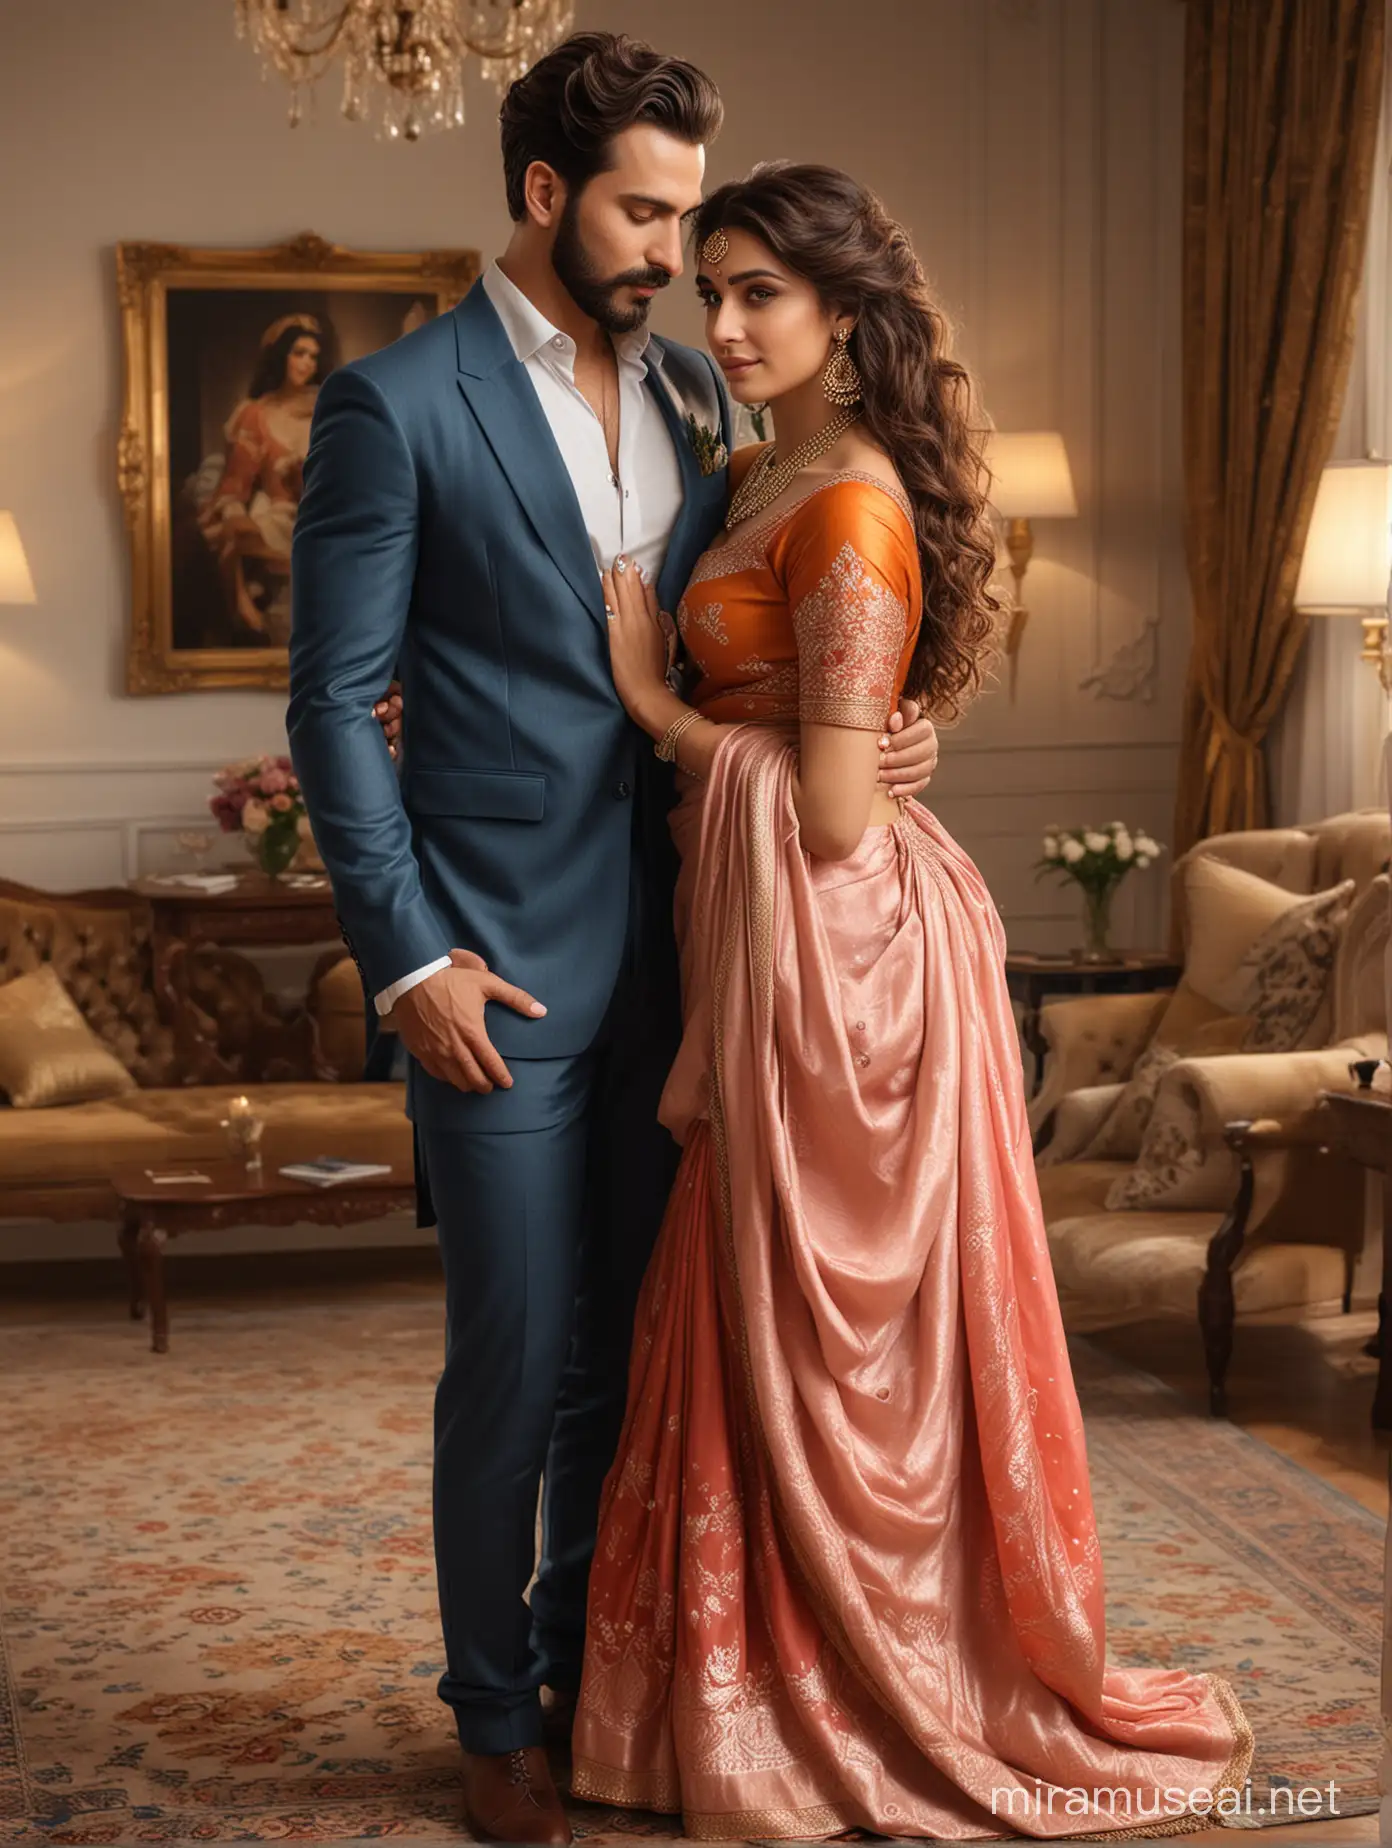 full body view  of most beautiful european couple as most beautiful indian couple, most beautiful girl in elegant bold color saree and long curly hairs, hairs tied  up with hair style stylishly, necklace,   big wide black  eyes, full face, makeup, low cut neck, man embracing with emotion and possessive feeling, pressing face to chest of girl for solace,  woman  comforting man placing her hands around him,  man with stylish beard, perfect short  hair cut, formals, photo realistic, 4k.
background, spacious modern elite photo room, with luxury sofa set, cream color carpet, elegant interior designs, vintage lamps, romantic reunion ambience, photorealistic, vibrant colors, intricate details, 8k.